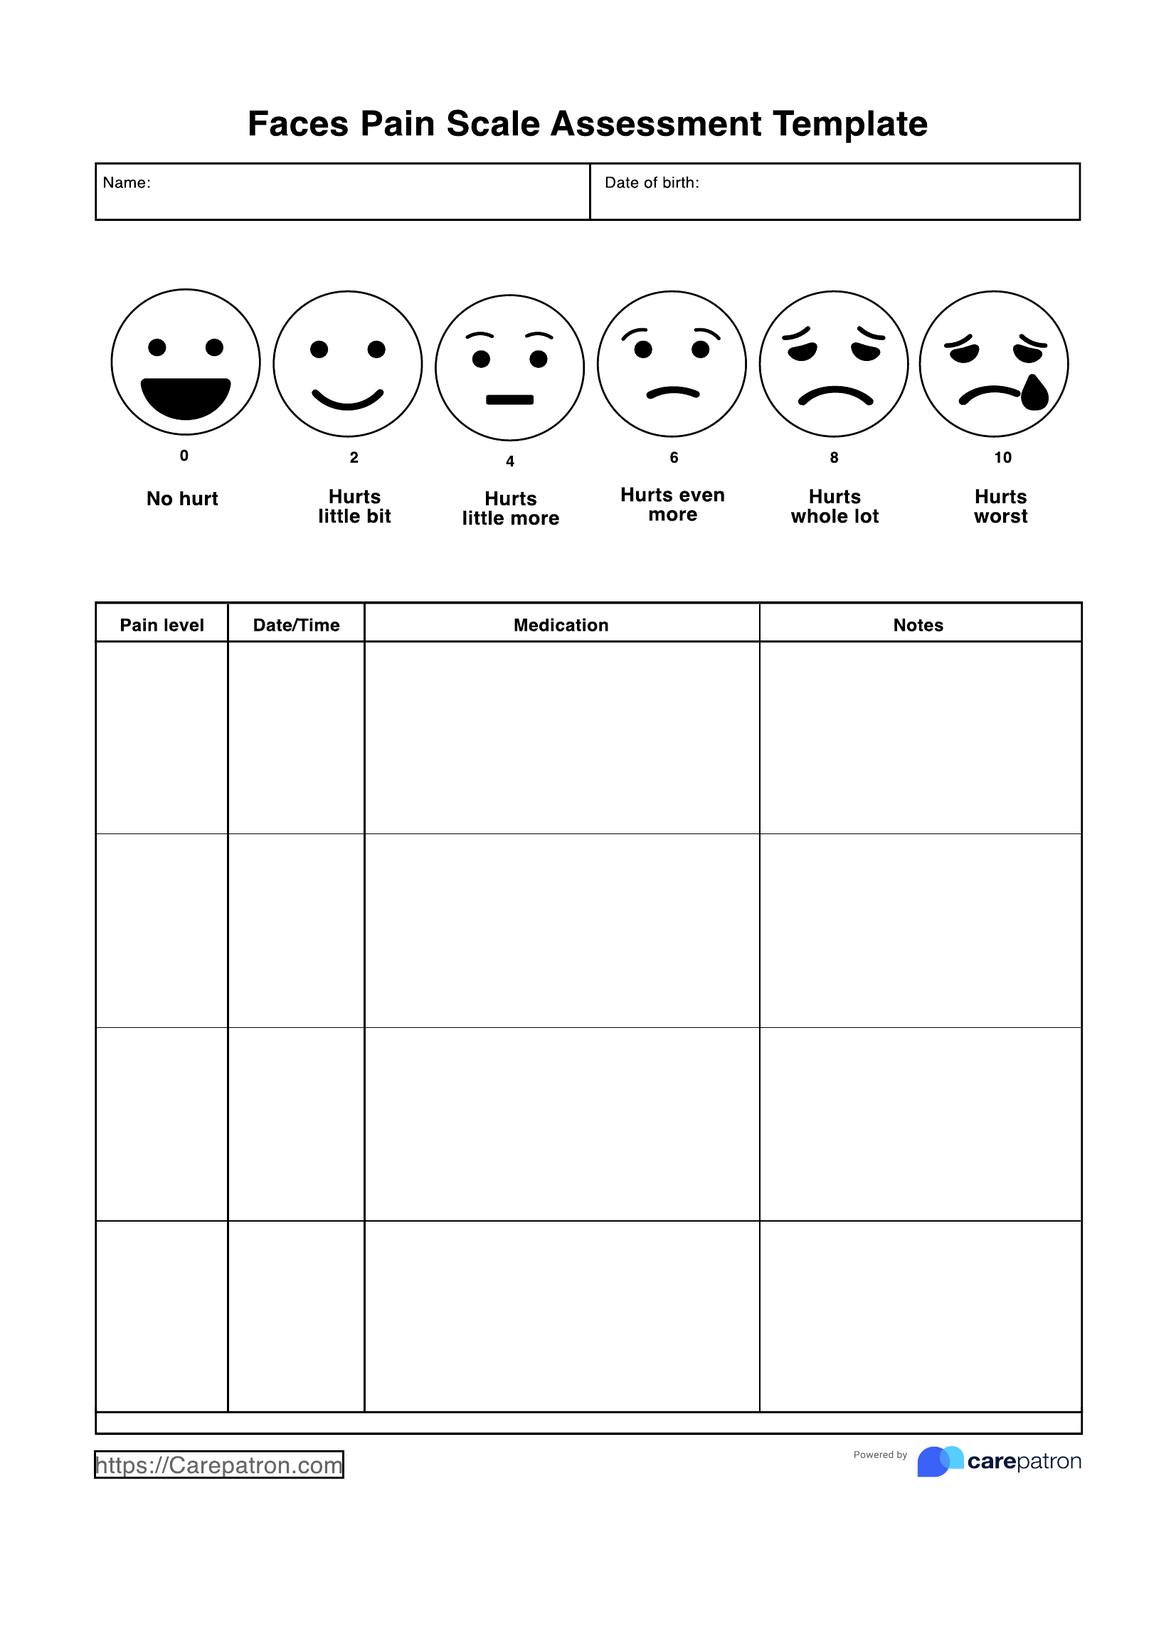 Faces Pain Scale PDF Example